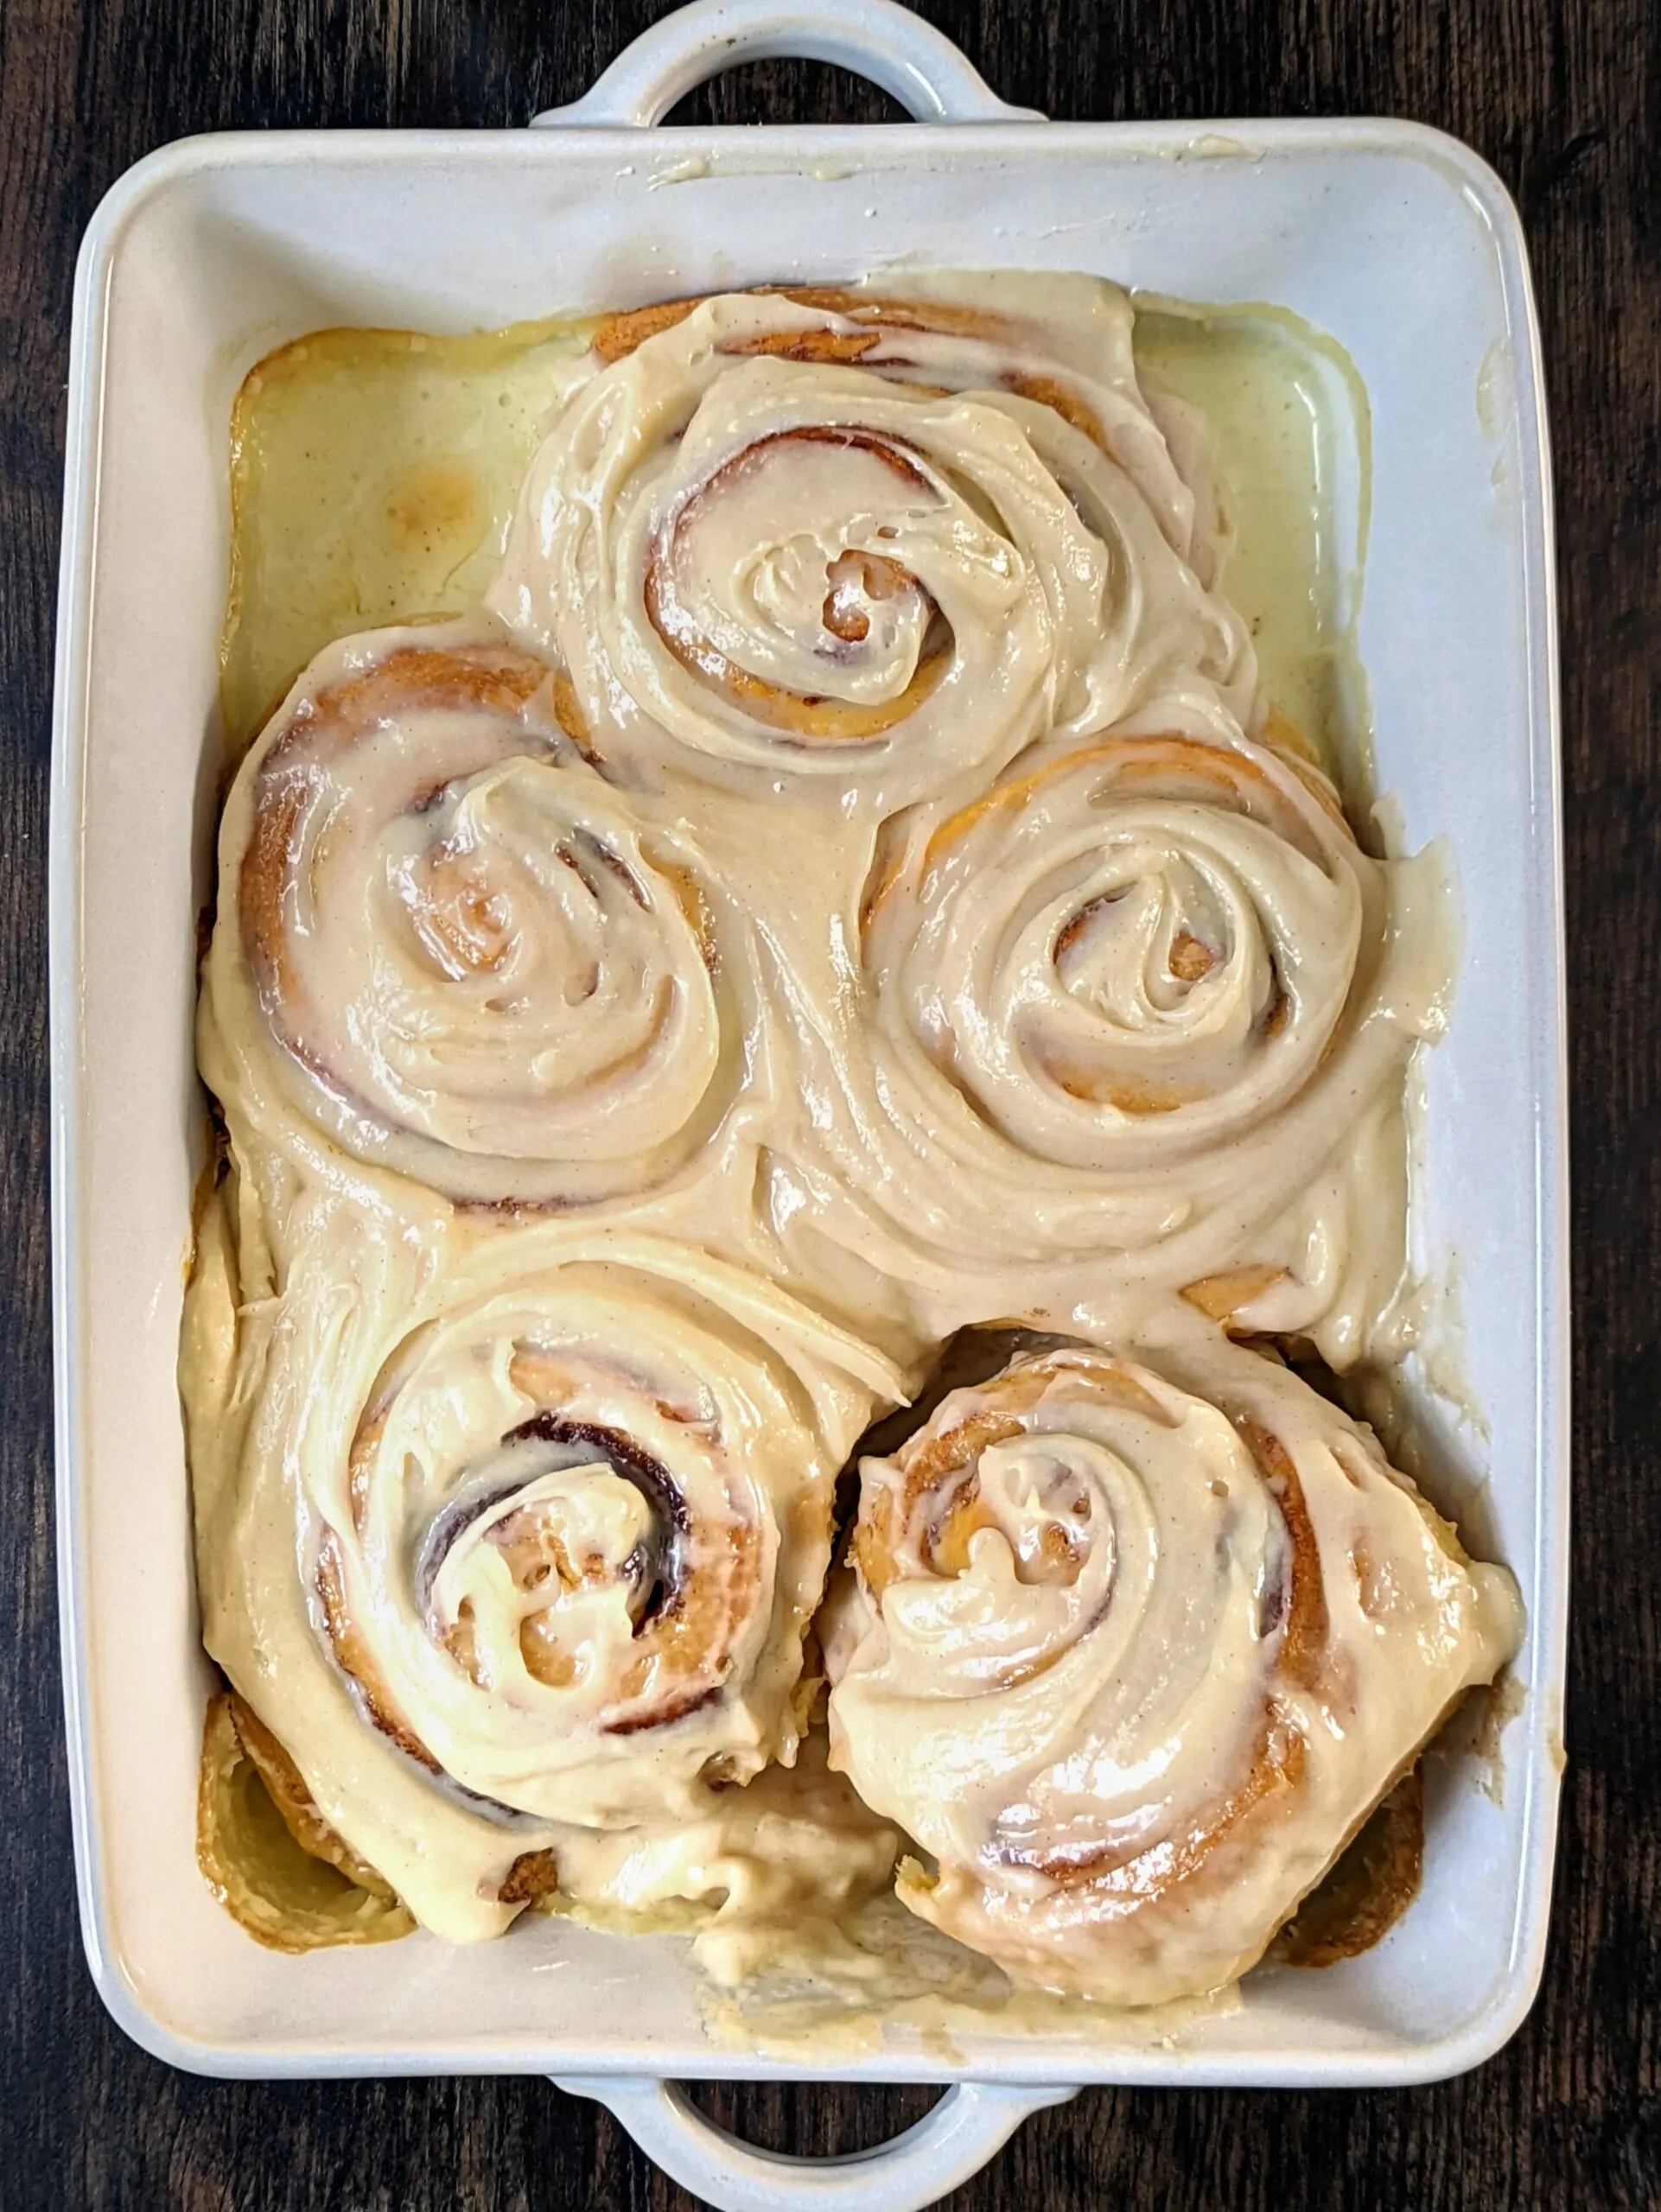 Cinnamon rolls with cream cheese frosting in a baking pan.